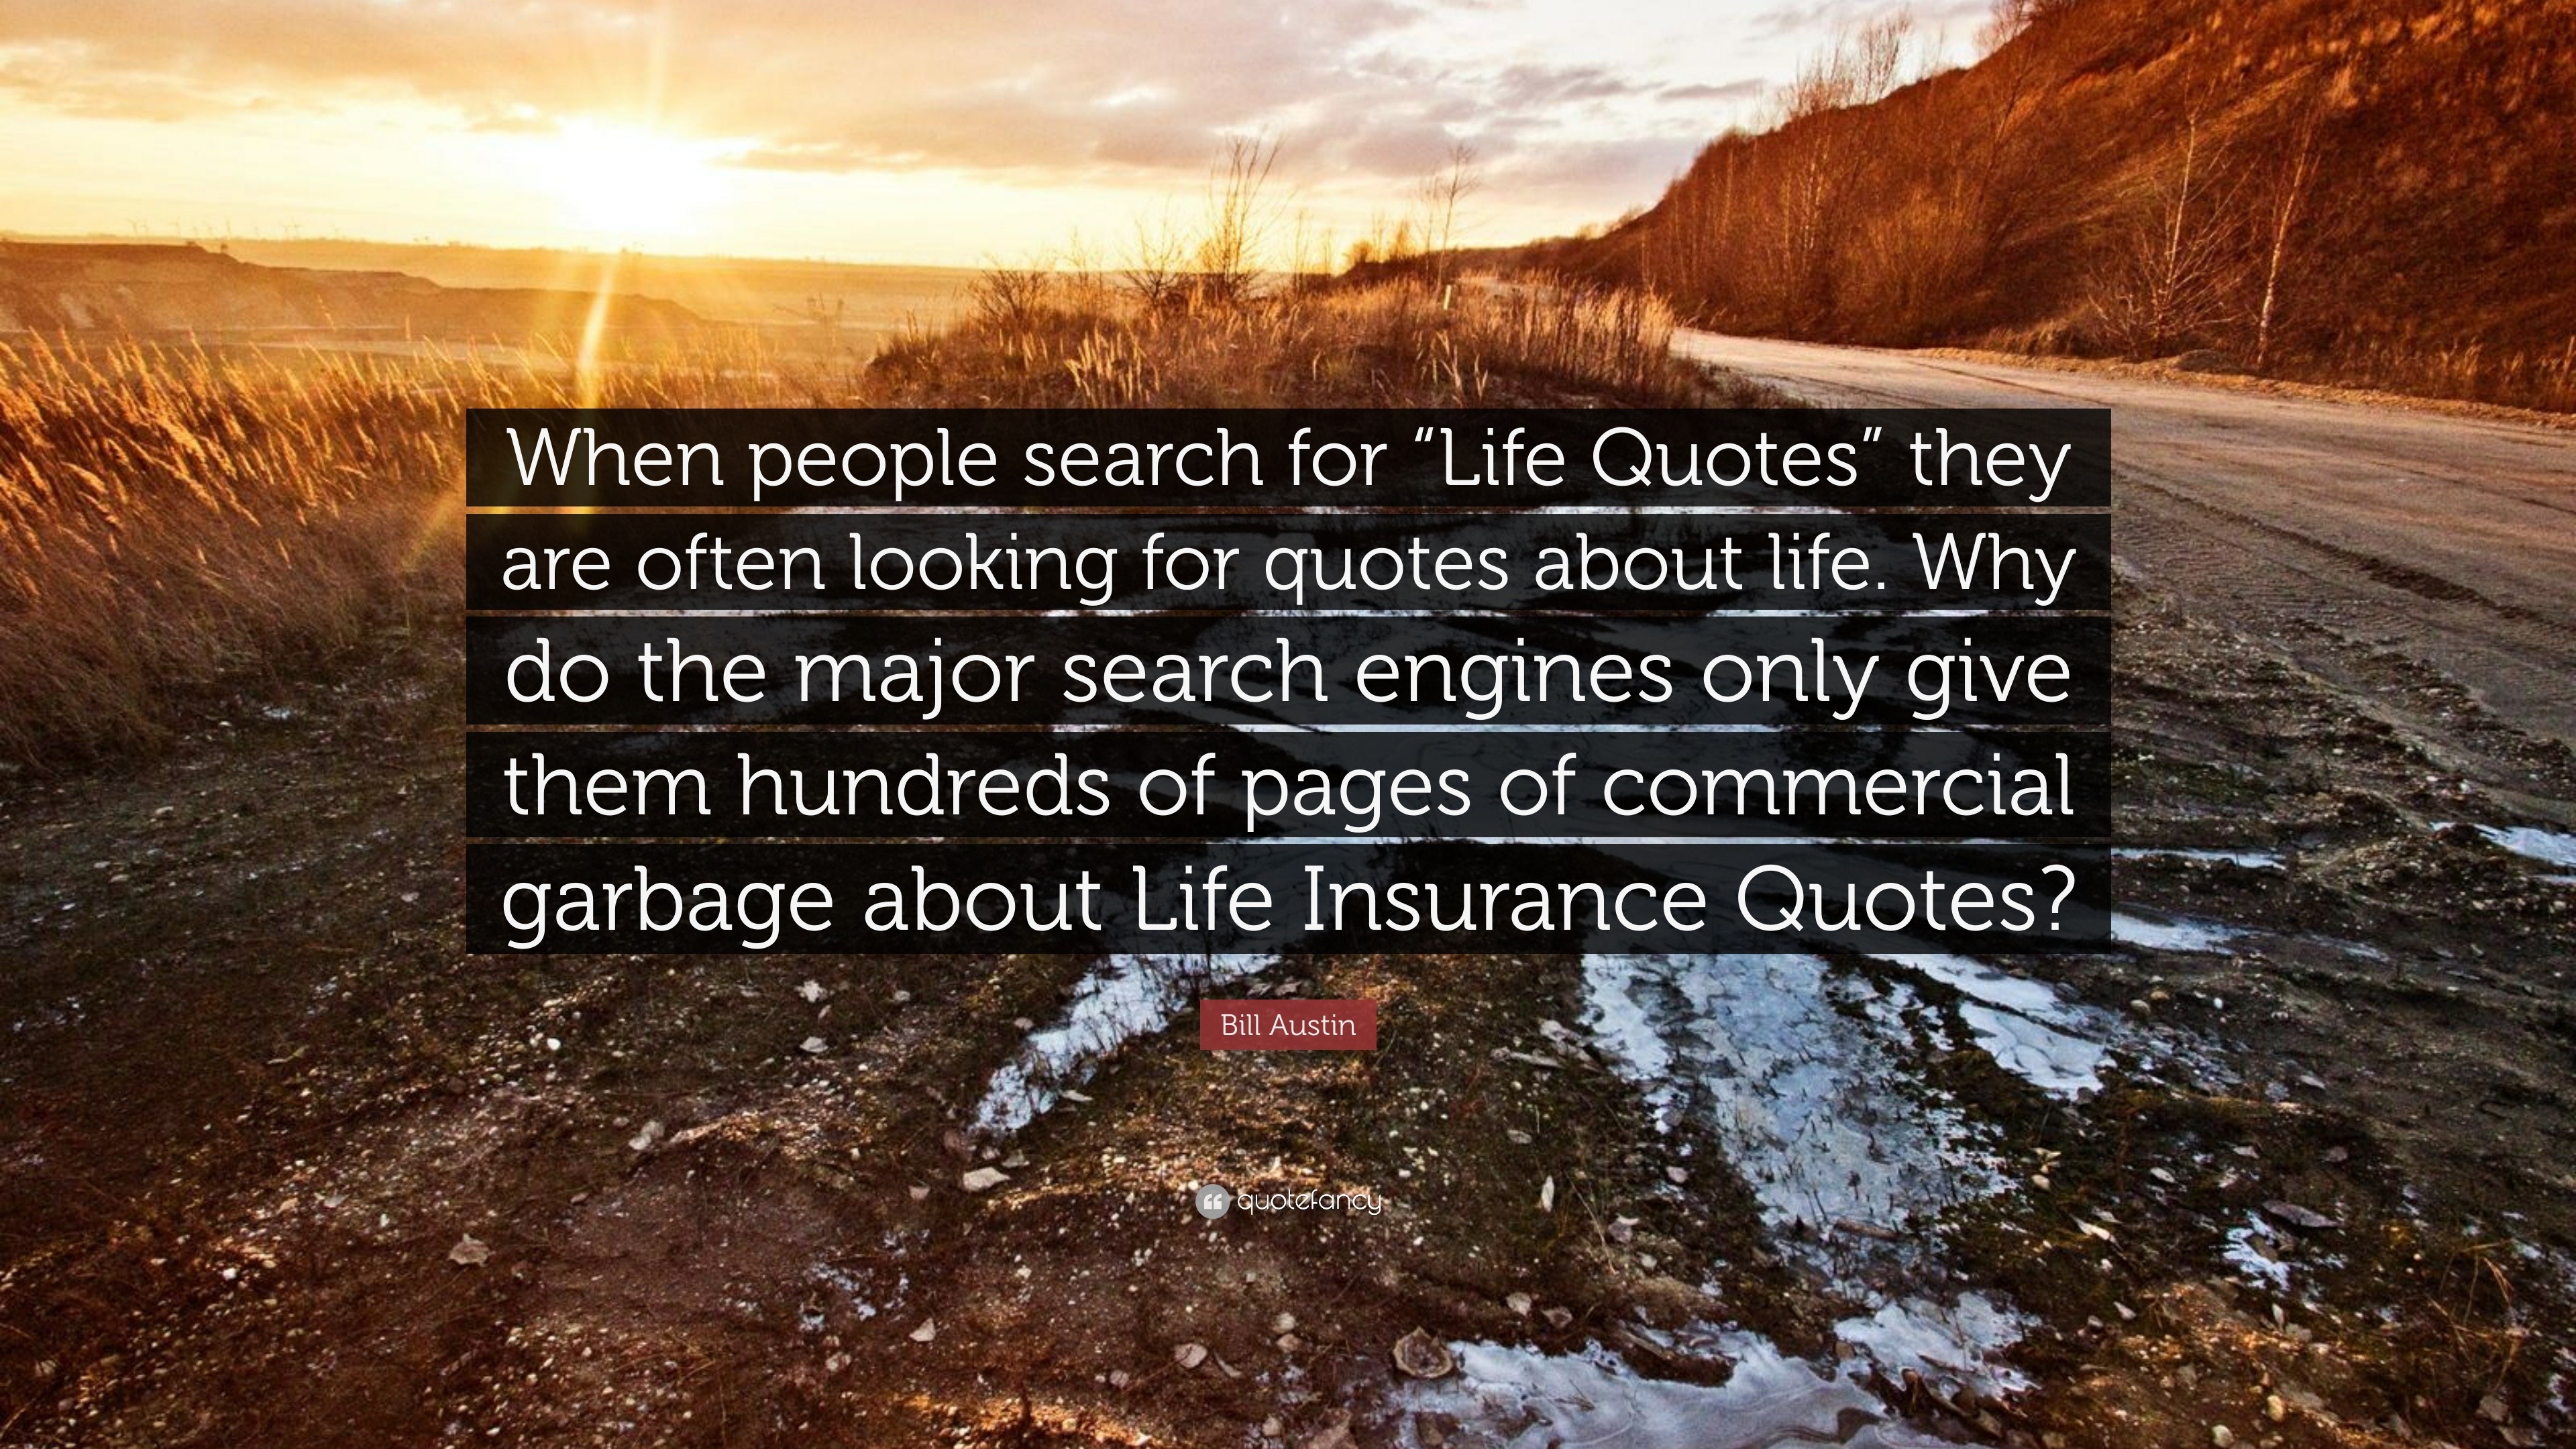 Bill Austin Quote “When people search for “Life Quotes” they are often